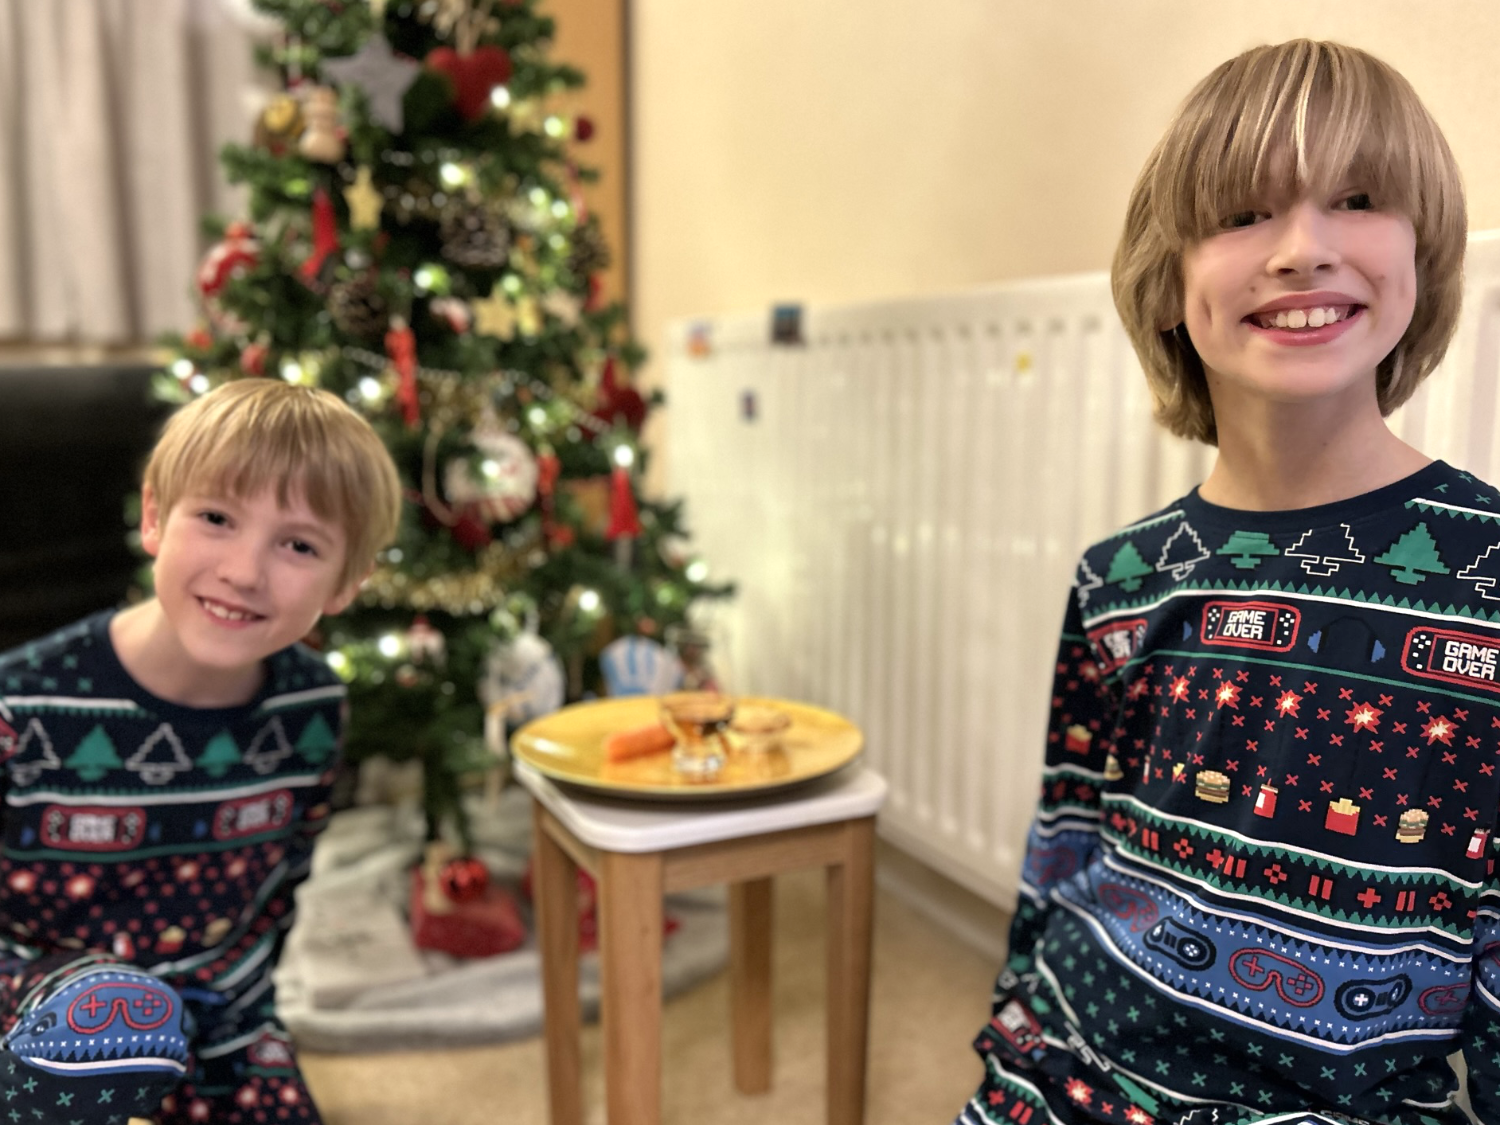 Toby and Gabe sitting in front of the Christmas tree in matching pyjamas.